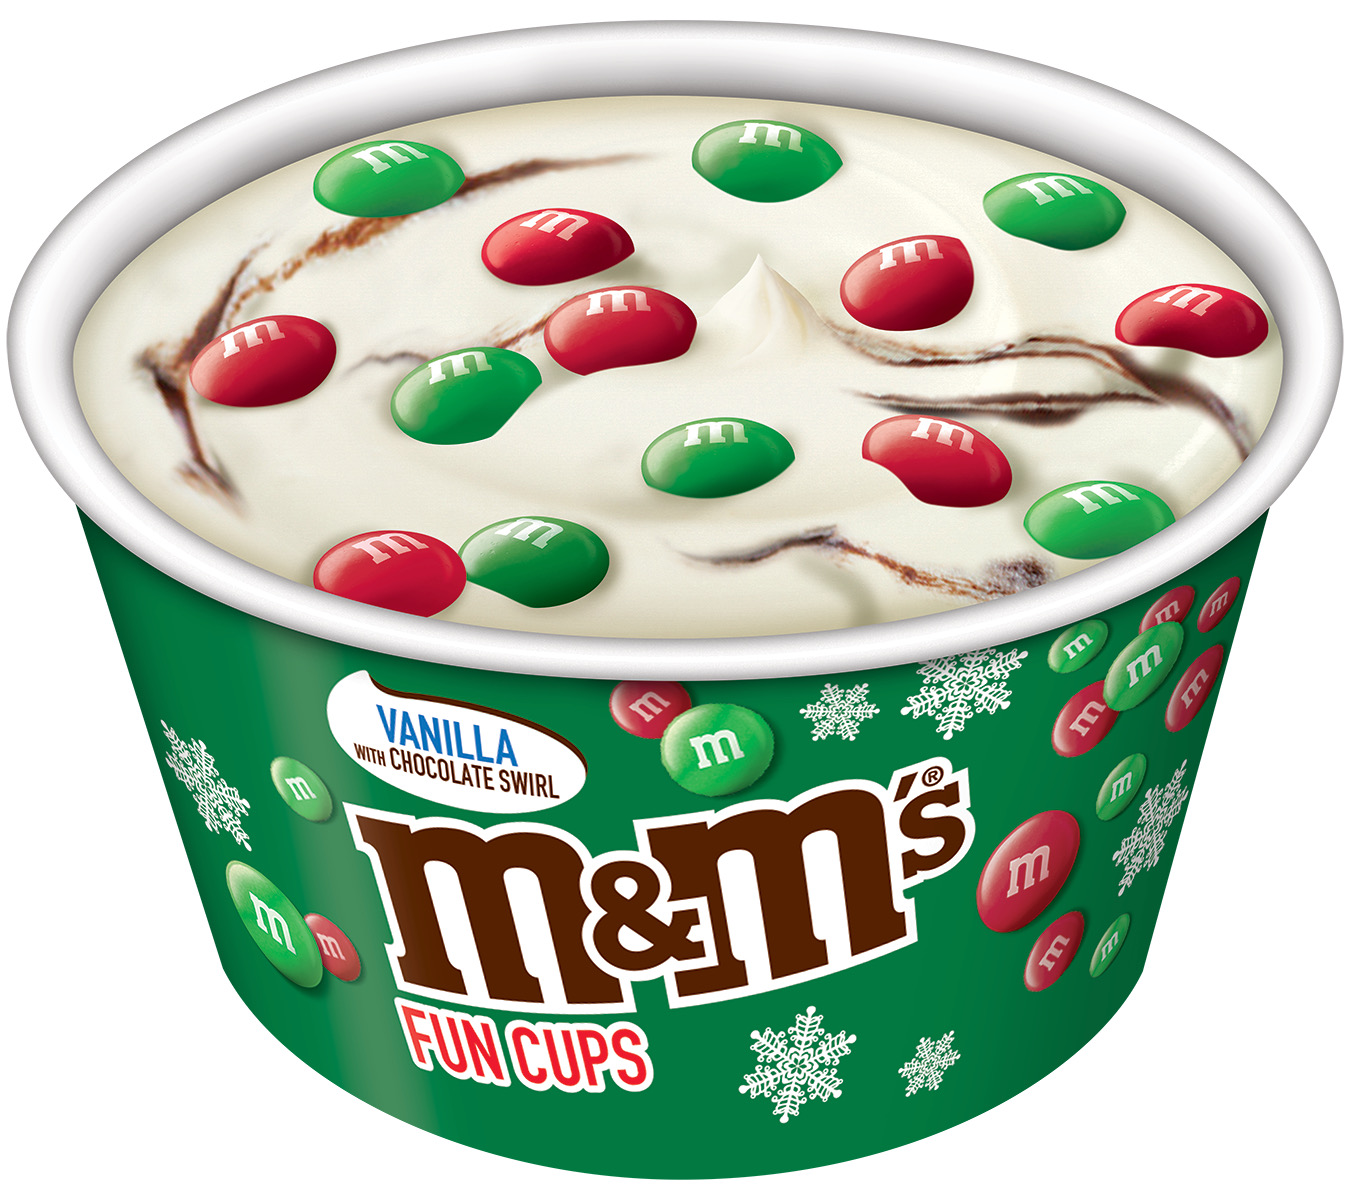 These Personal-Sized M&M's Fun Cups Are Our Go-to Ice Cream This Summer